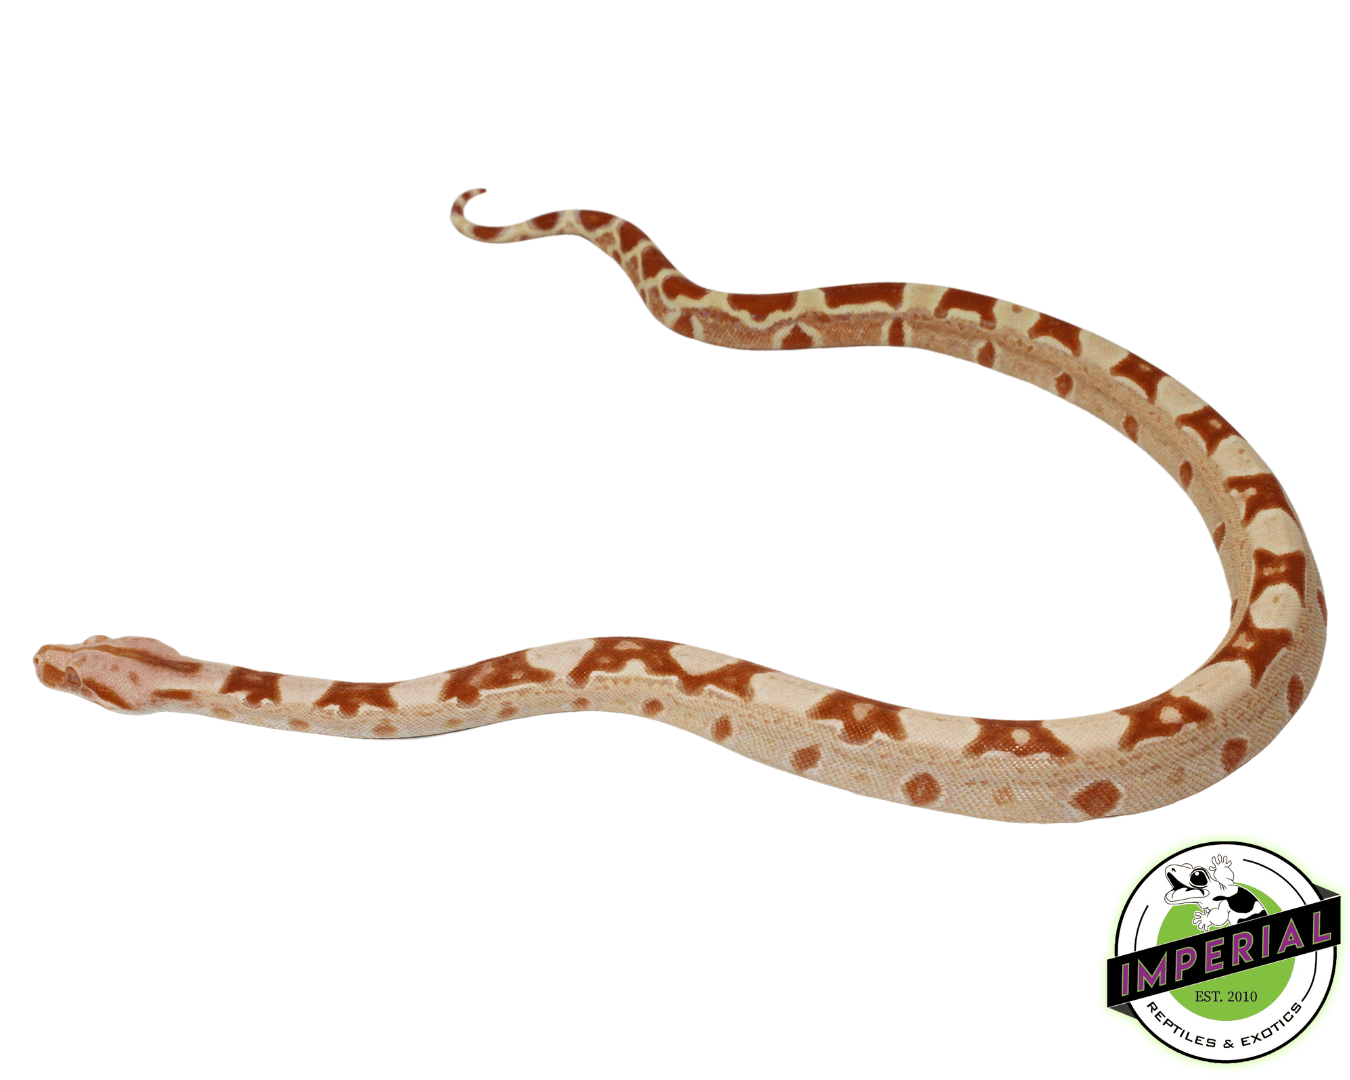 sunglow colombian boa constrictor for sale, buy reptiles online